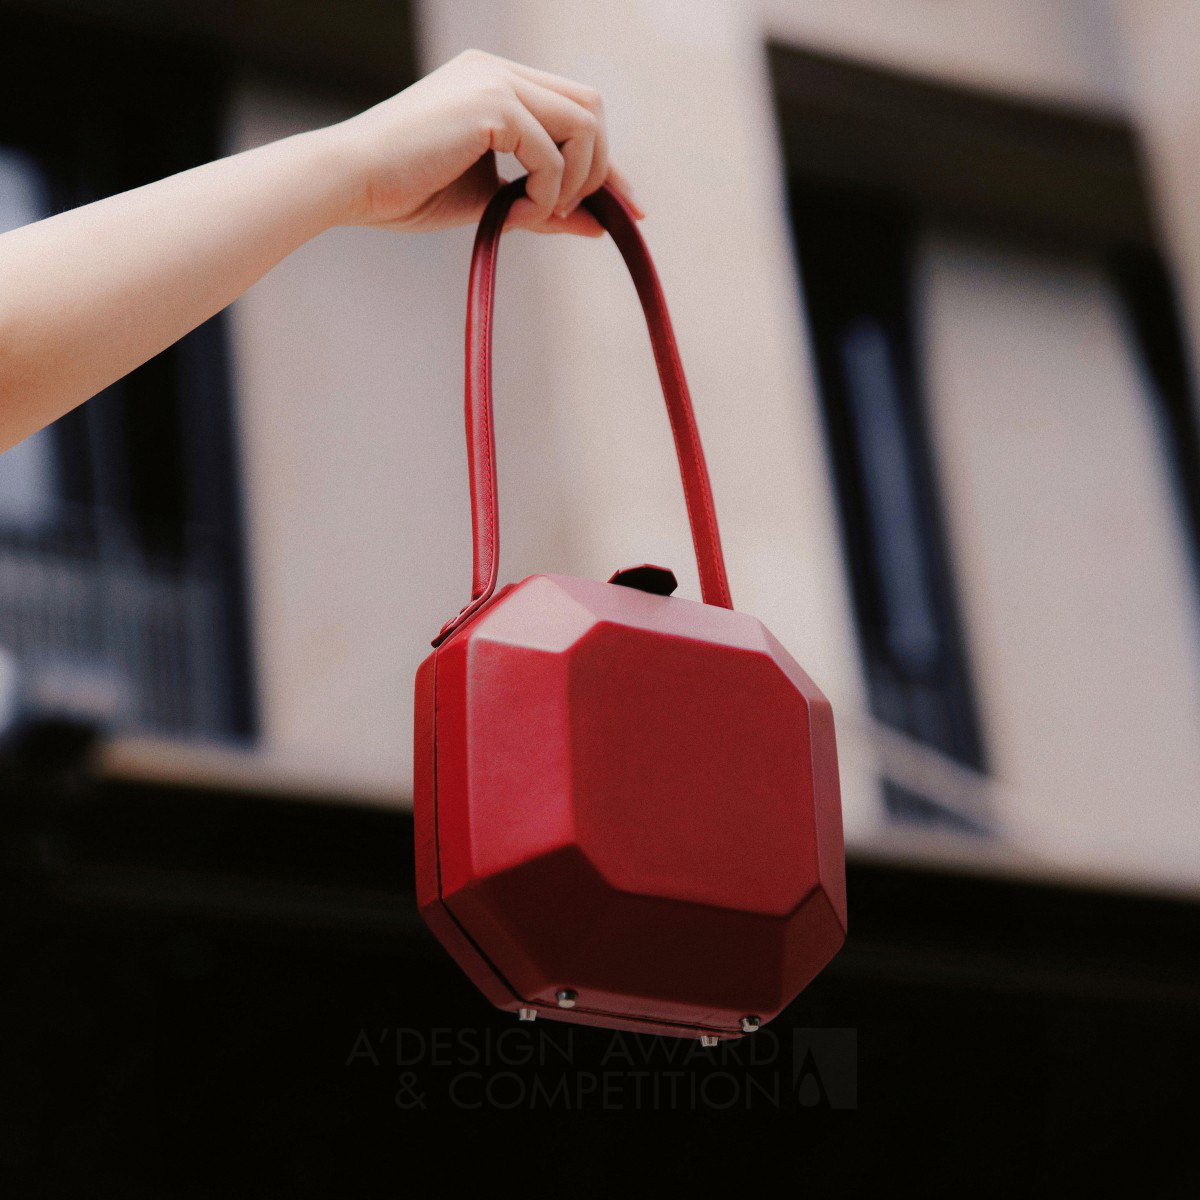 Leather Gem Bag by Theyknow Design Team